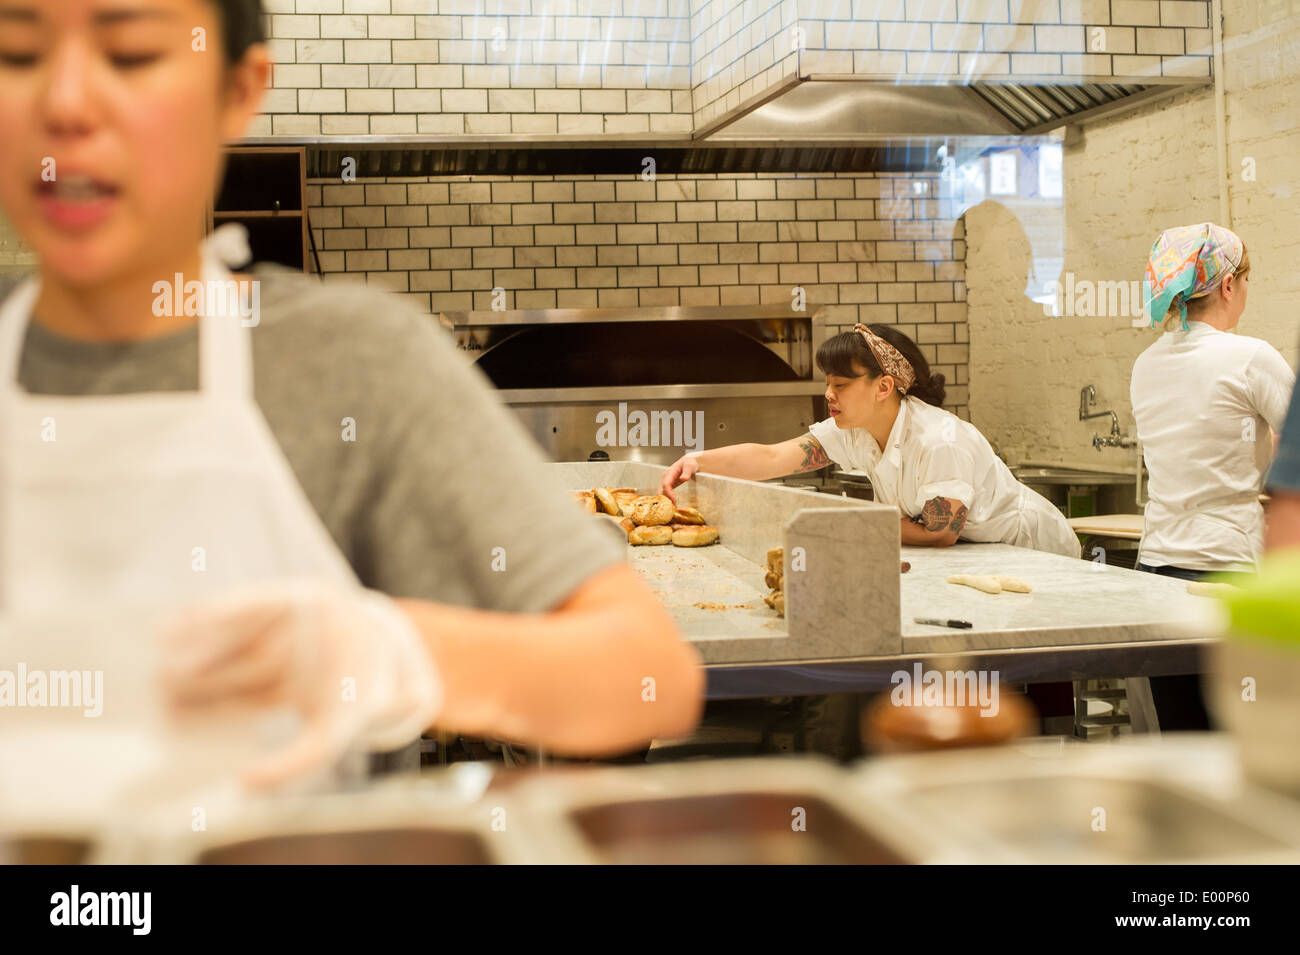 Workers prepare artisanal Montreal style bagels in the Black Seed bagelry in Nolita in New York Stock Photo